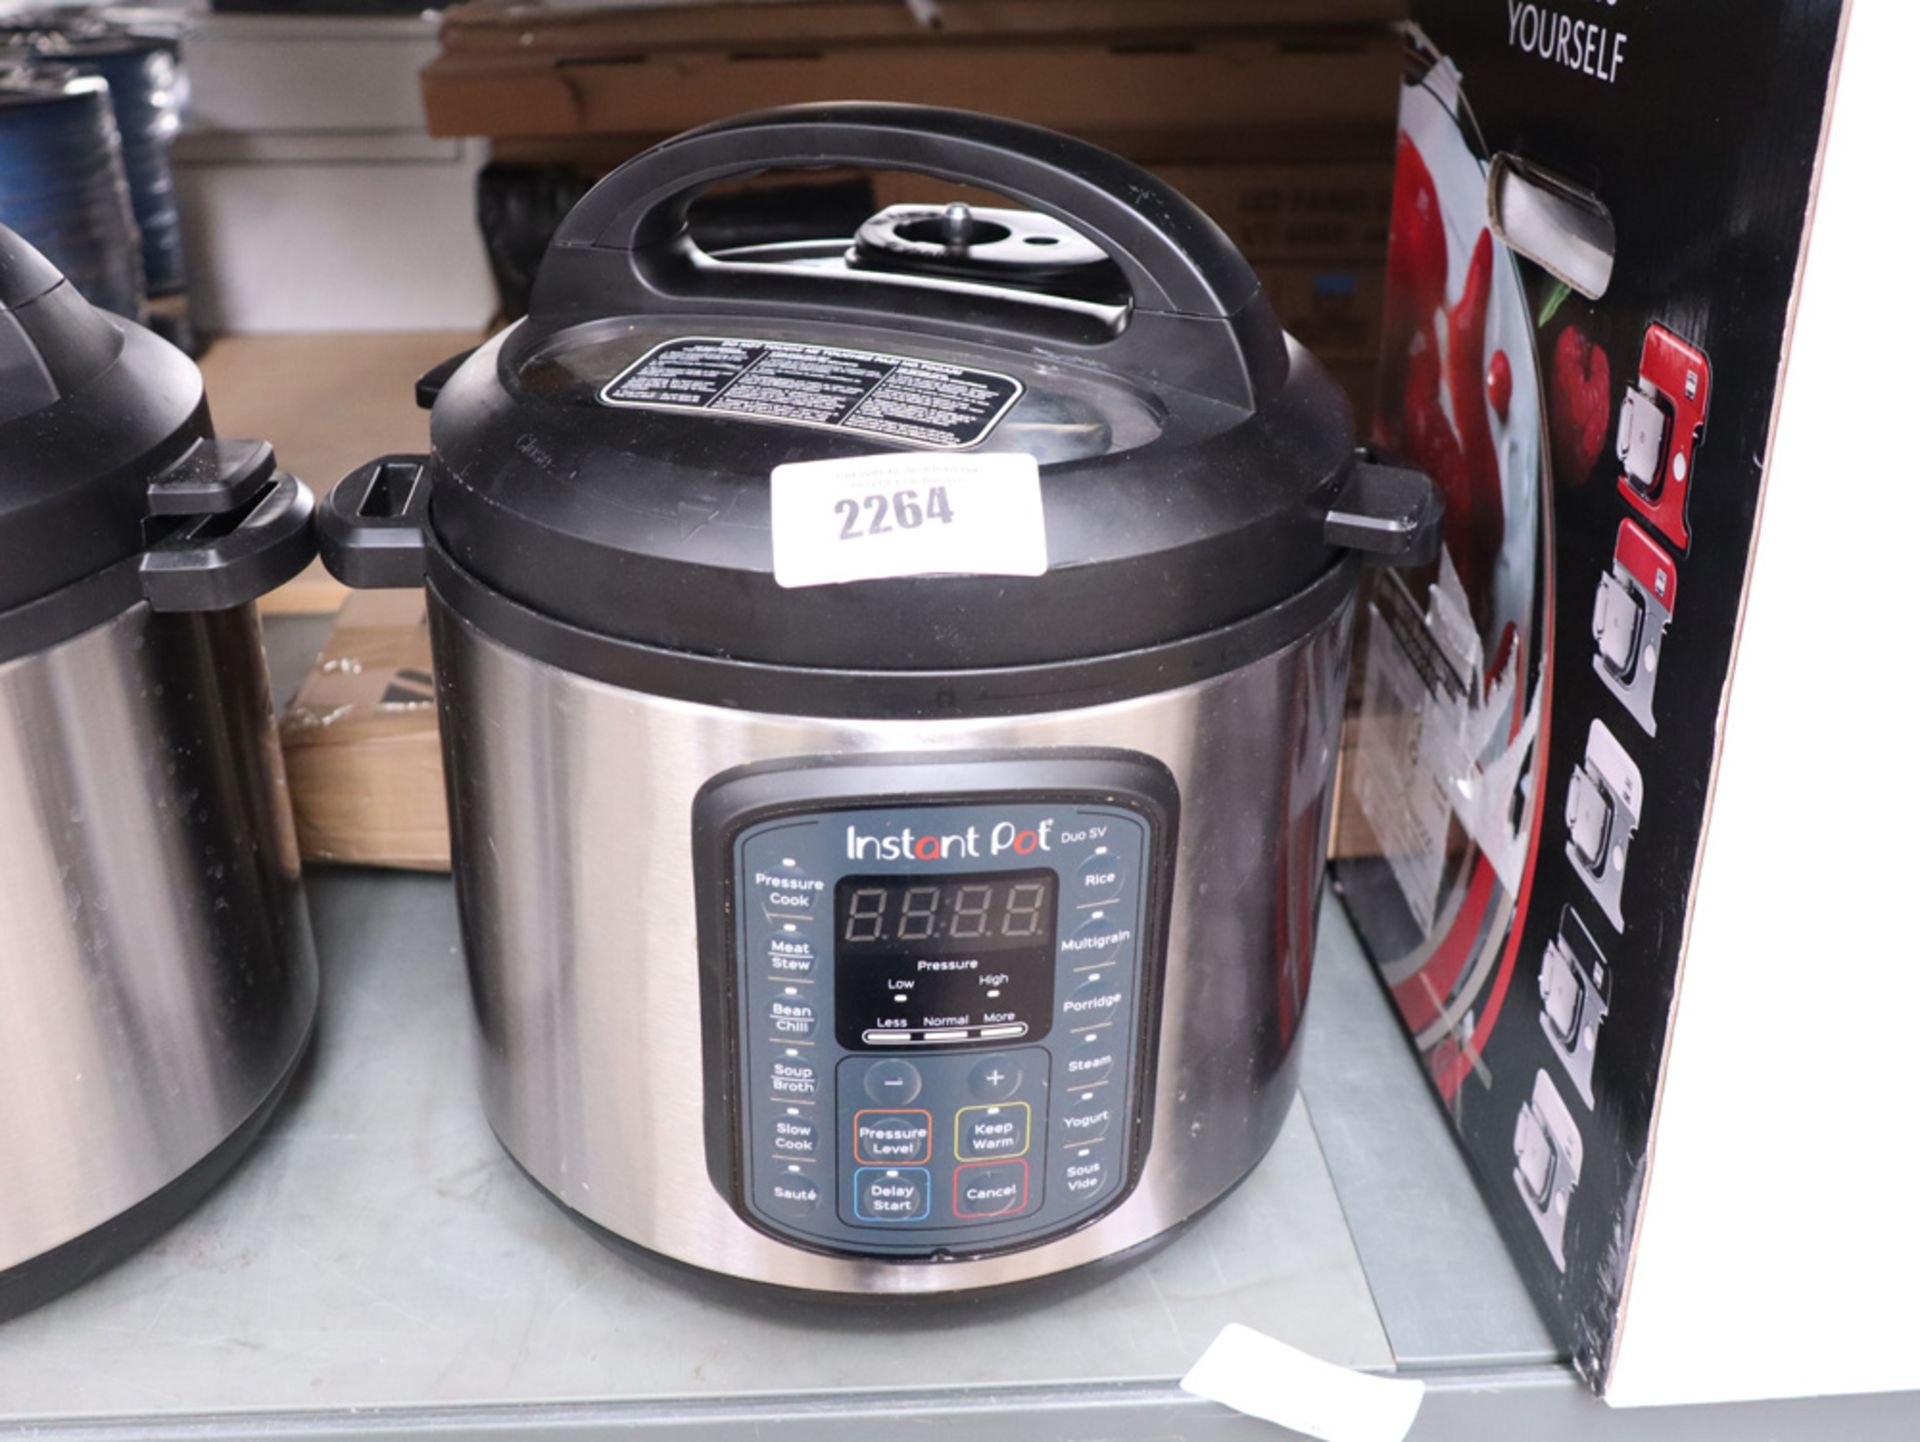 Unboxed Instant Pot pressure cooker with no gauge